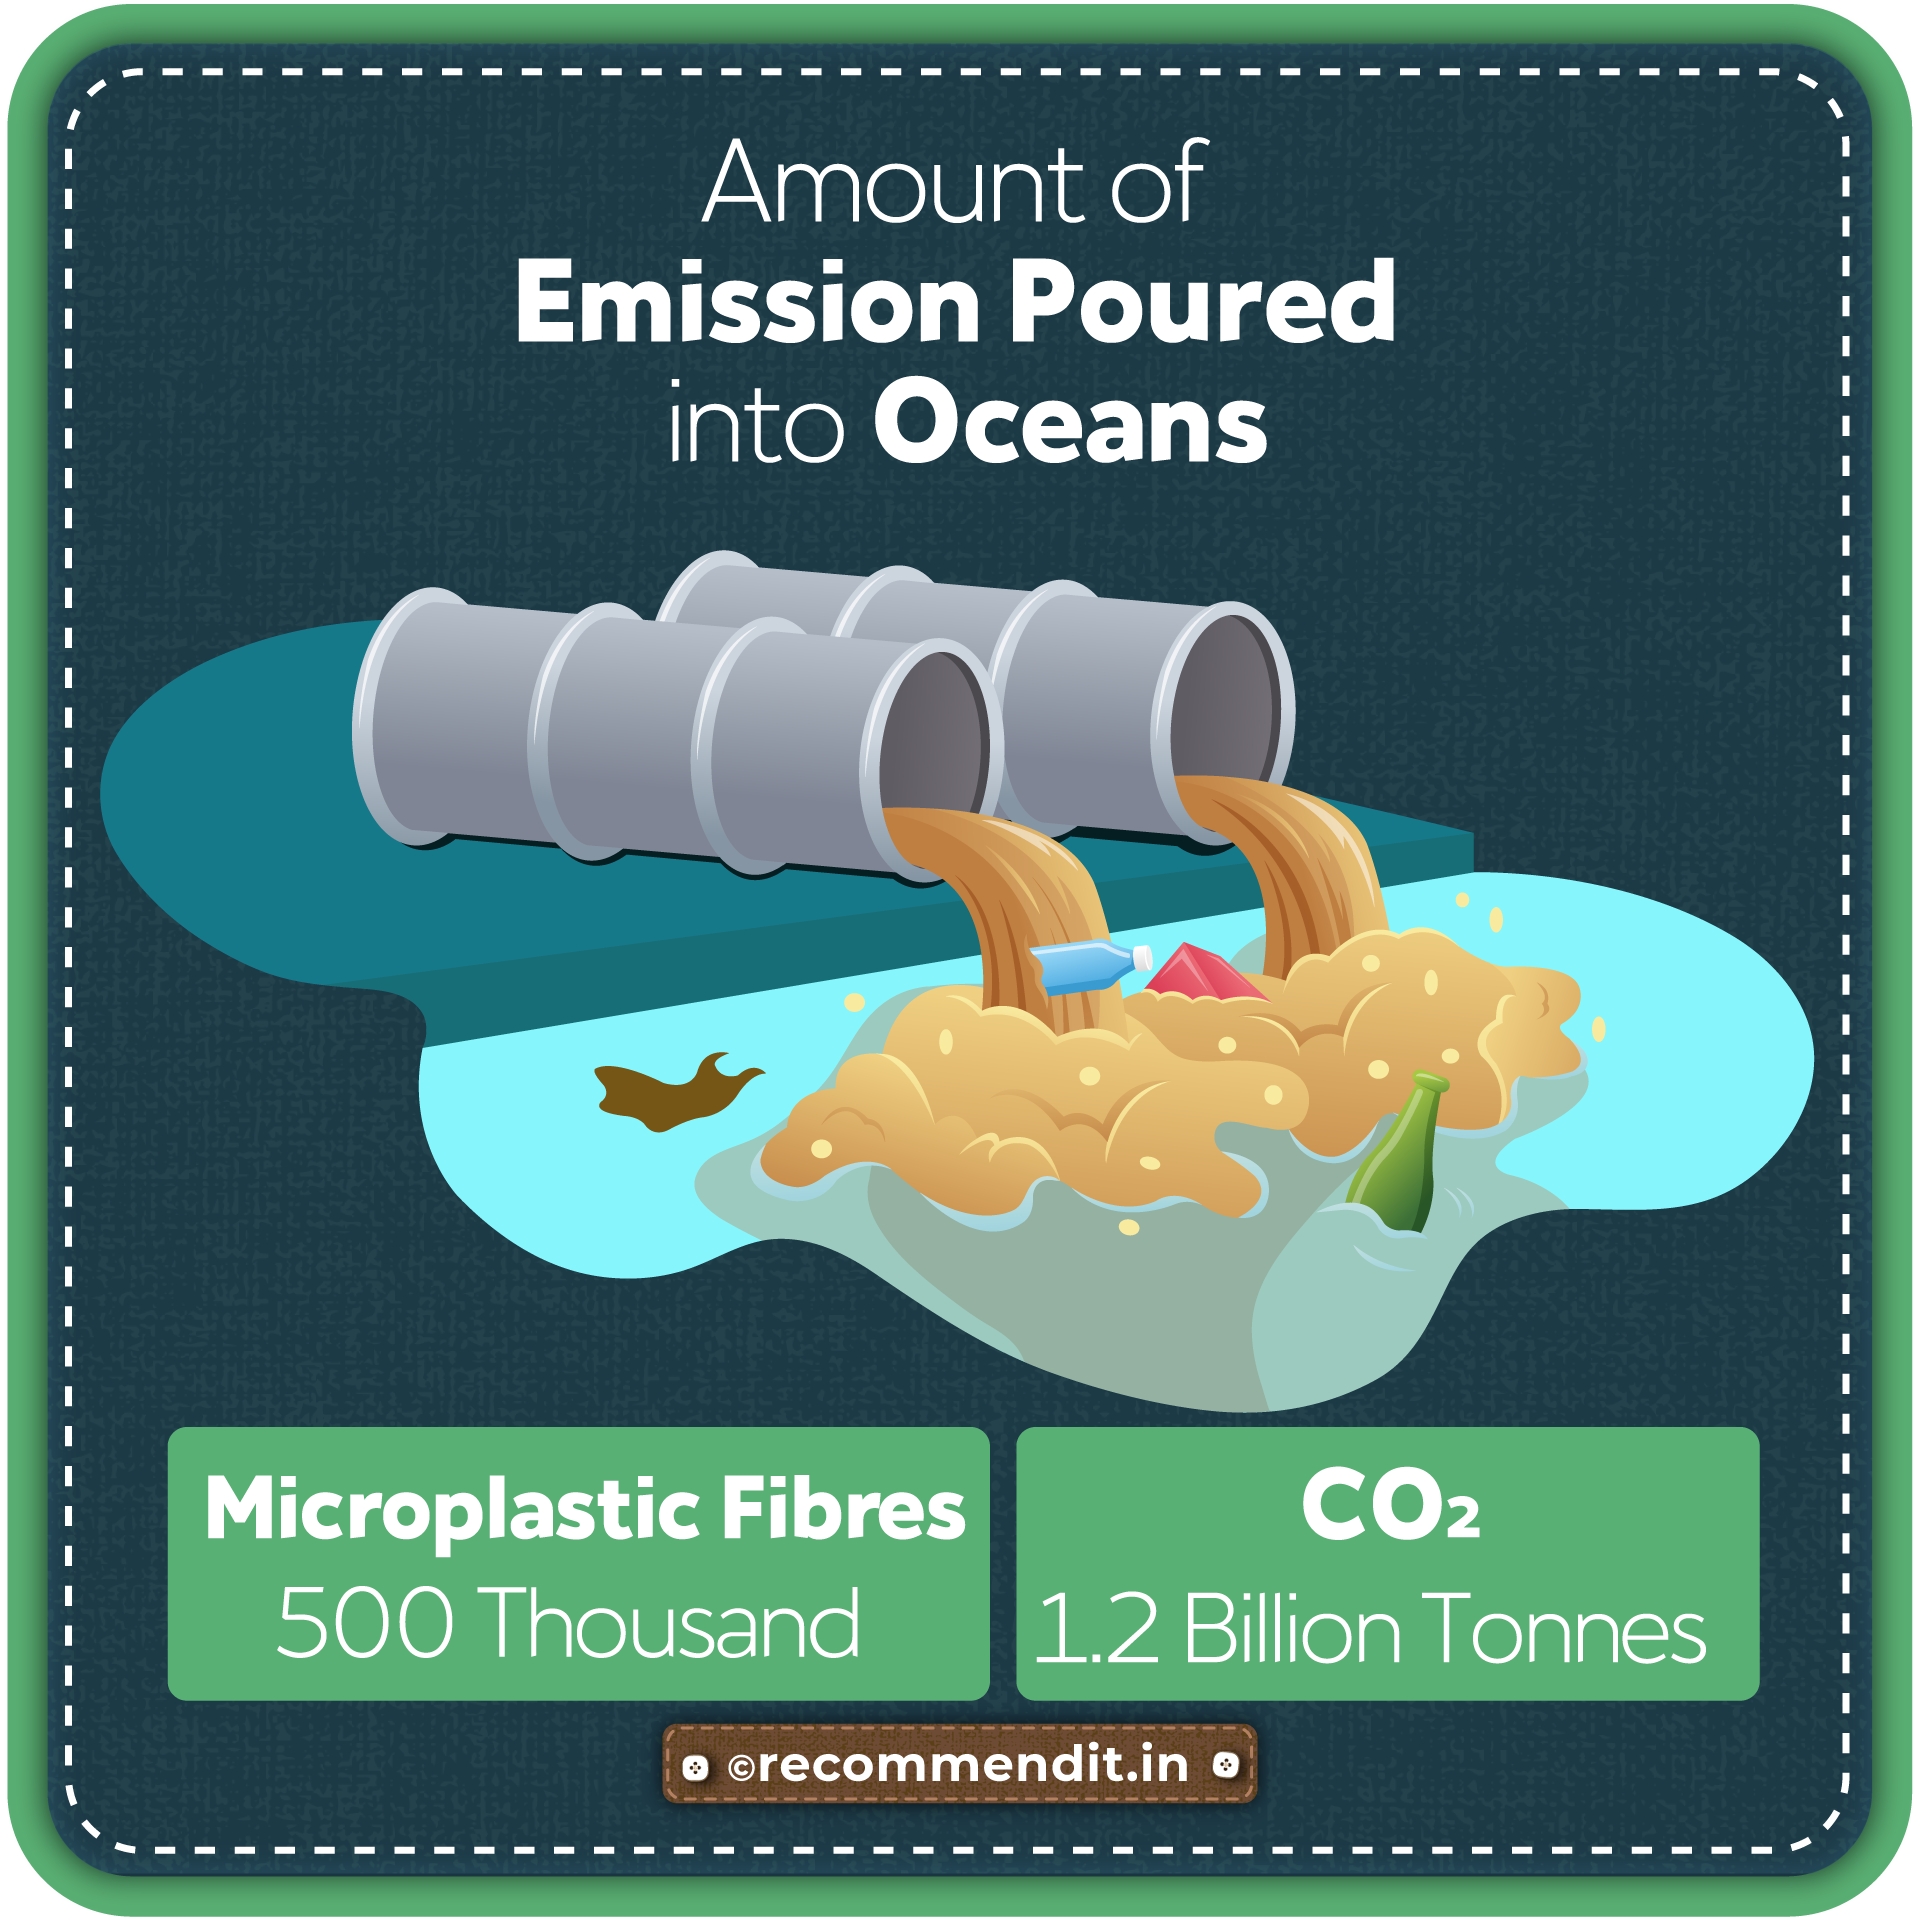 Emission poured into oceans